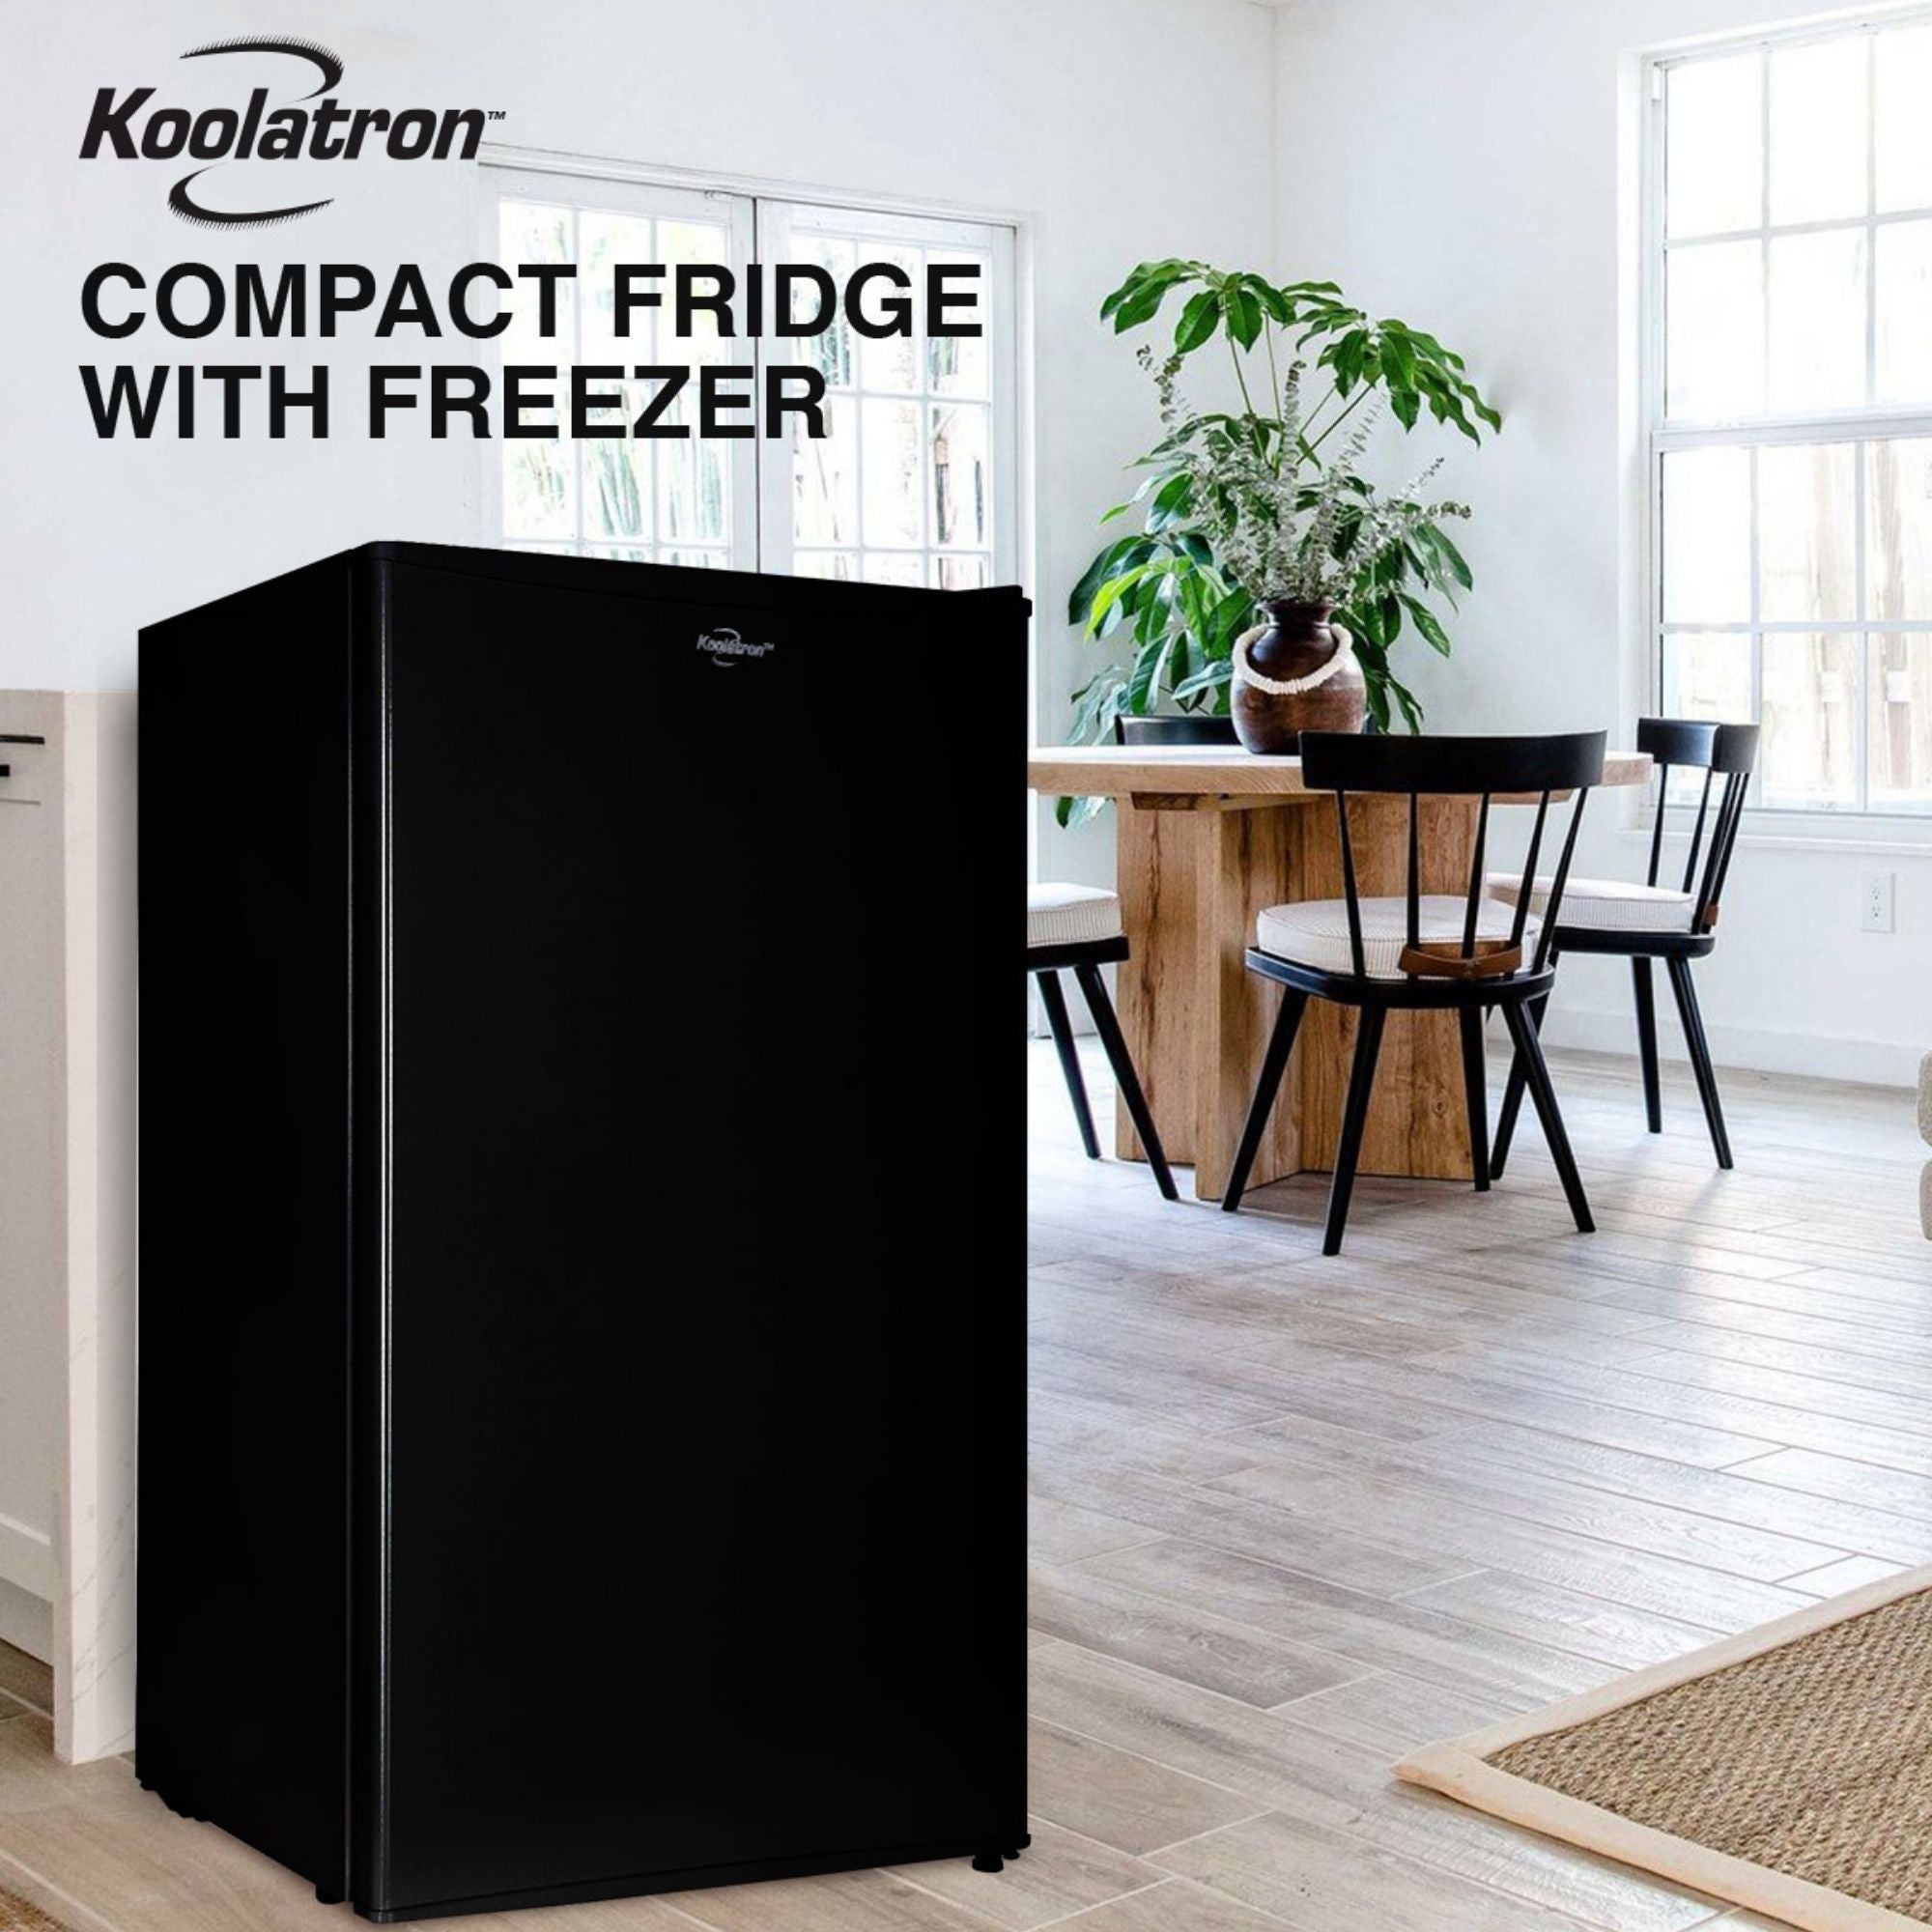 Lifestyle image of black compact fridge with freezer on a light-colored plank floor with a wooden table and chairs, two large windows, and a large potted plant in the background. Text above reads "Koolatron compact fridge with freezer"